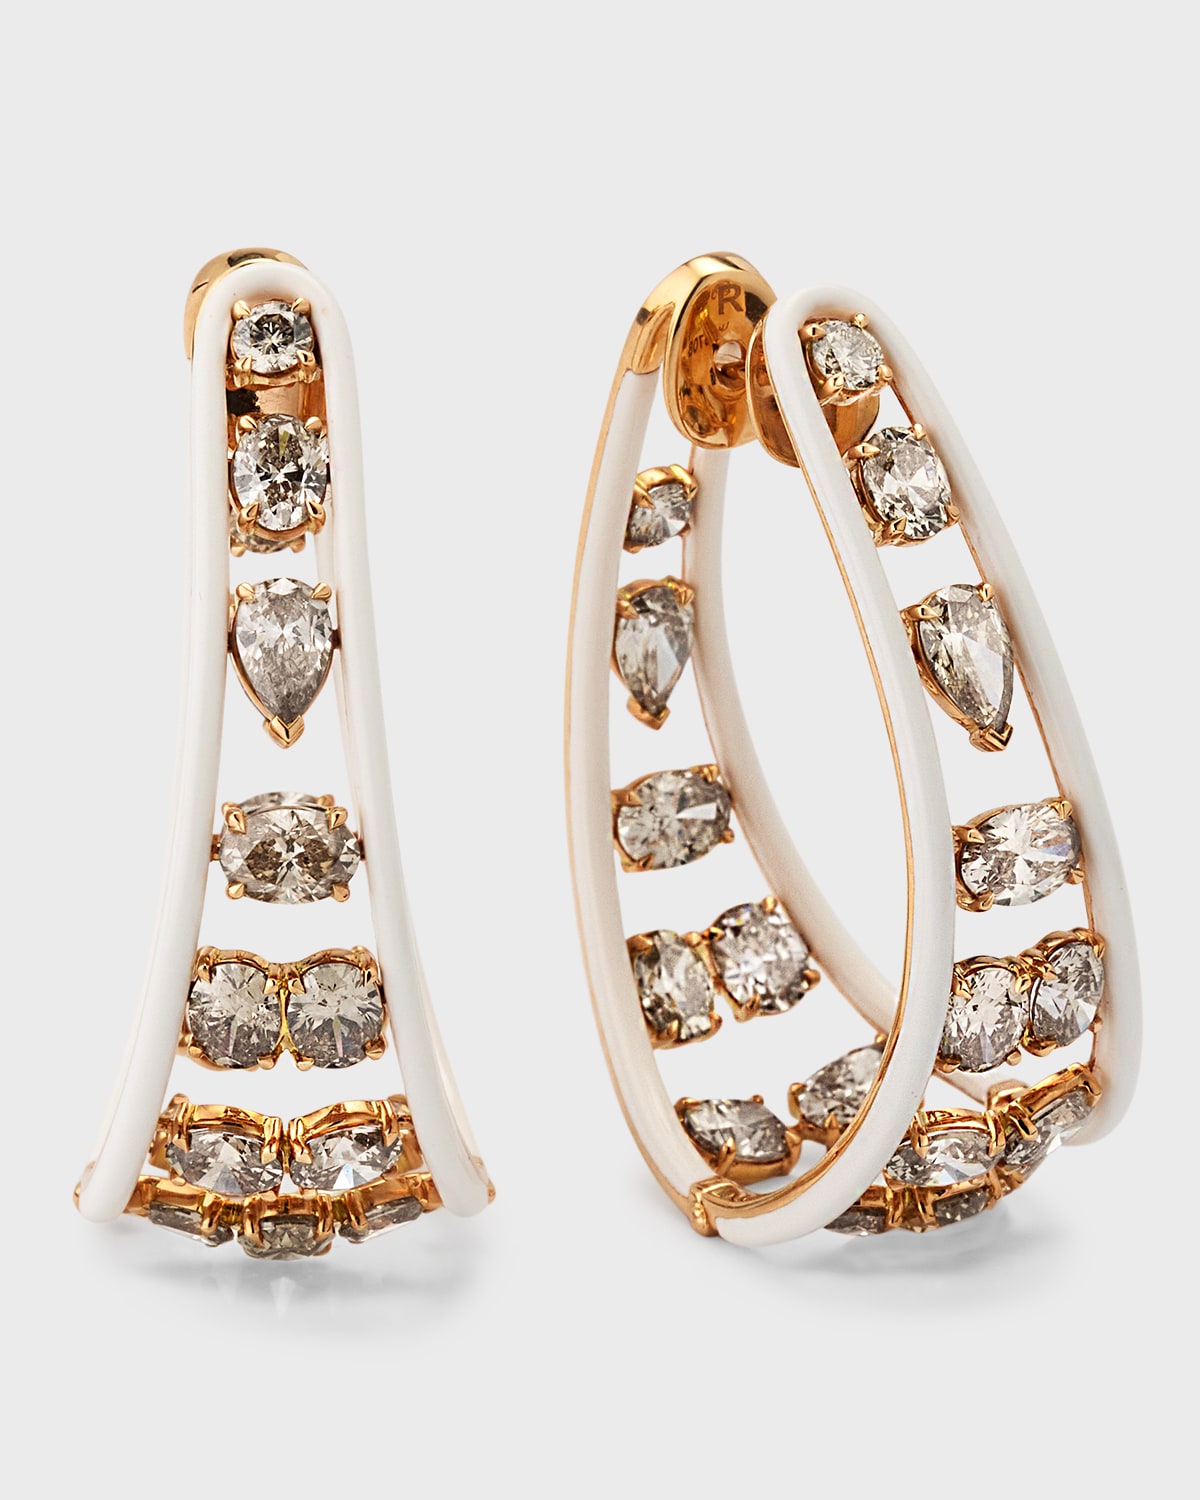 18K Pink Gold Hoop Earrings with Brown Diamonds and White Ceramic